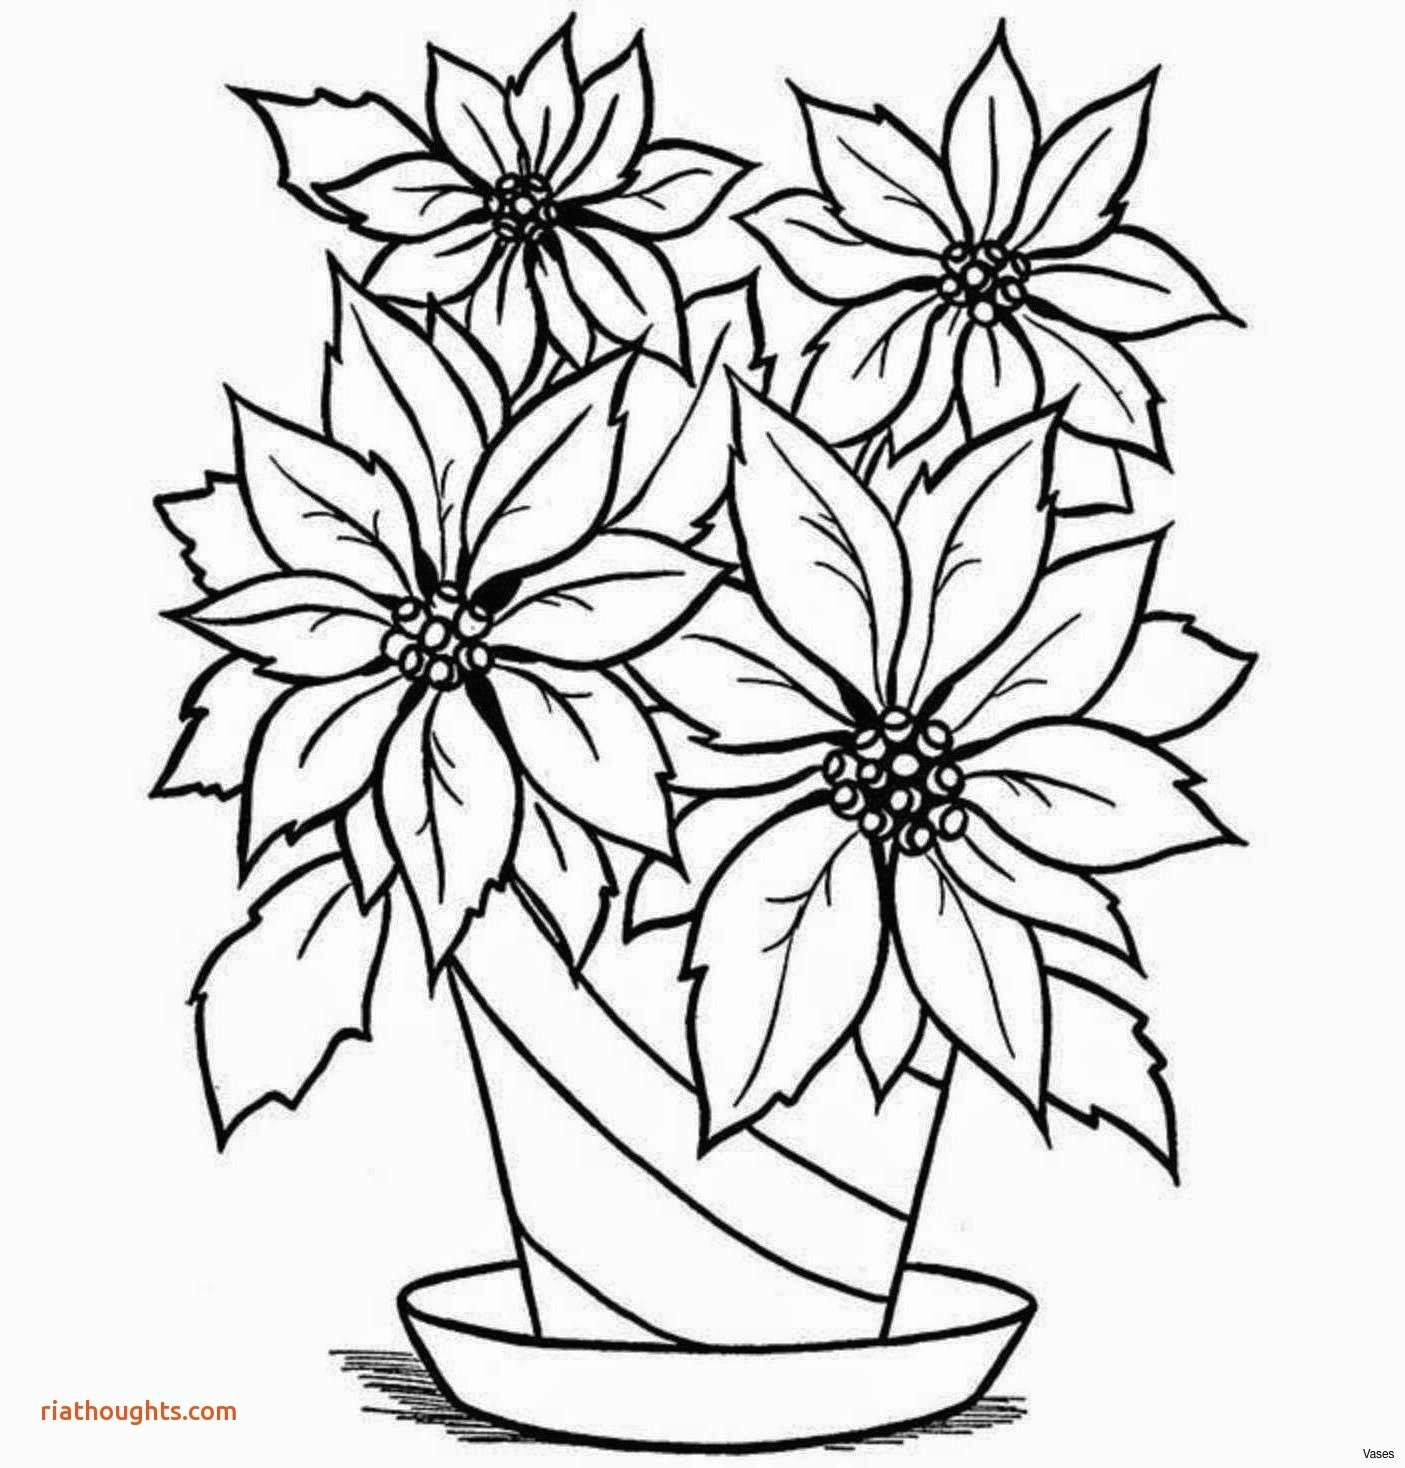 drawn vase pencil drawing 14h vases how to draw flowers in a pin sunflower 3i 0d elegant cool drawings for kids step